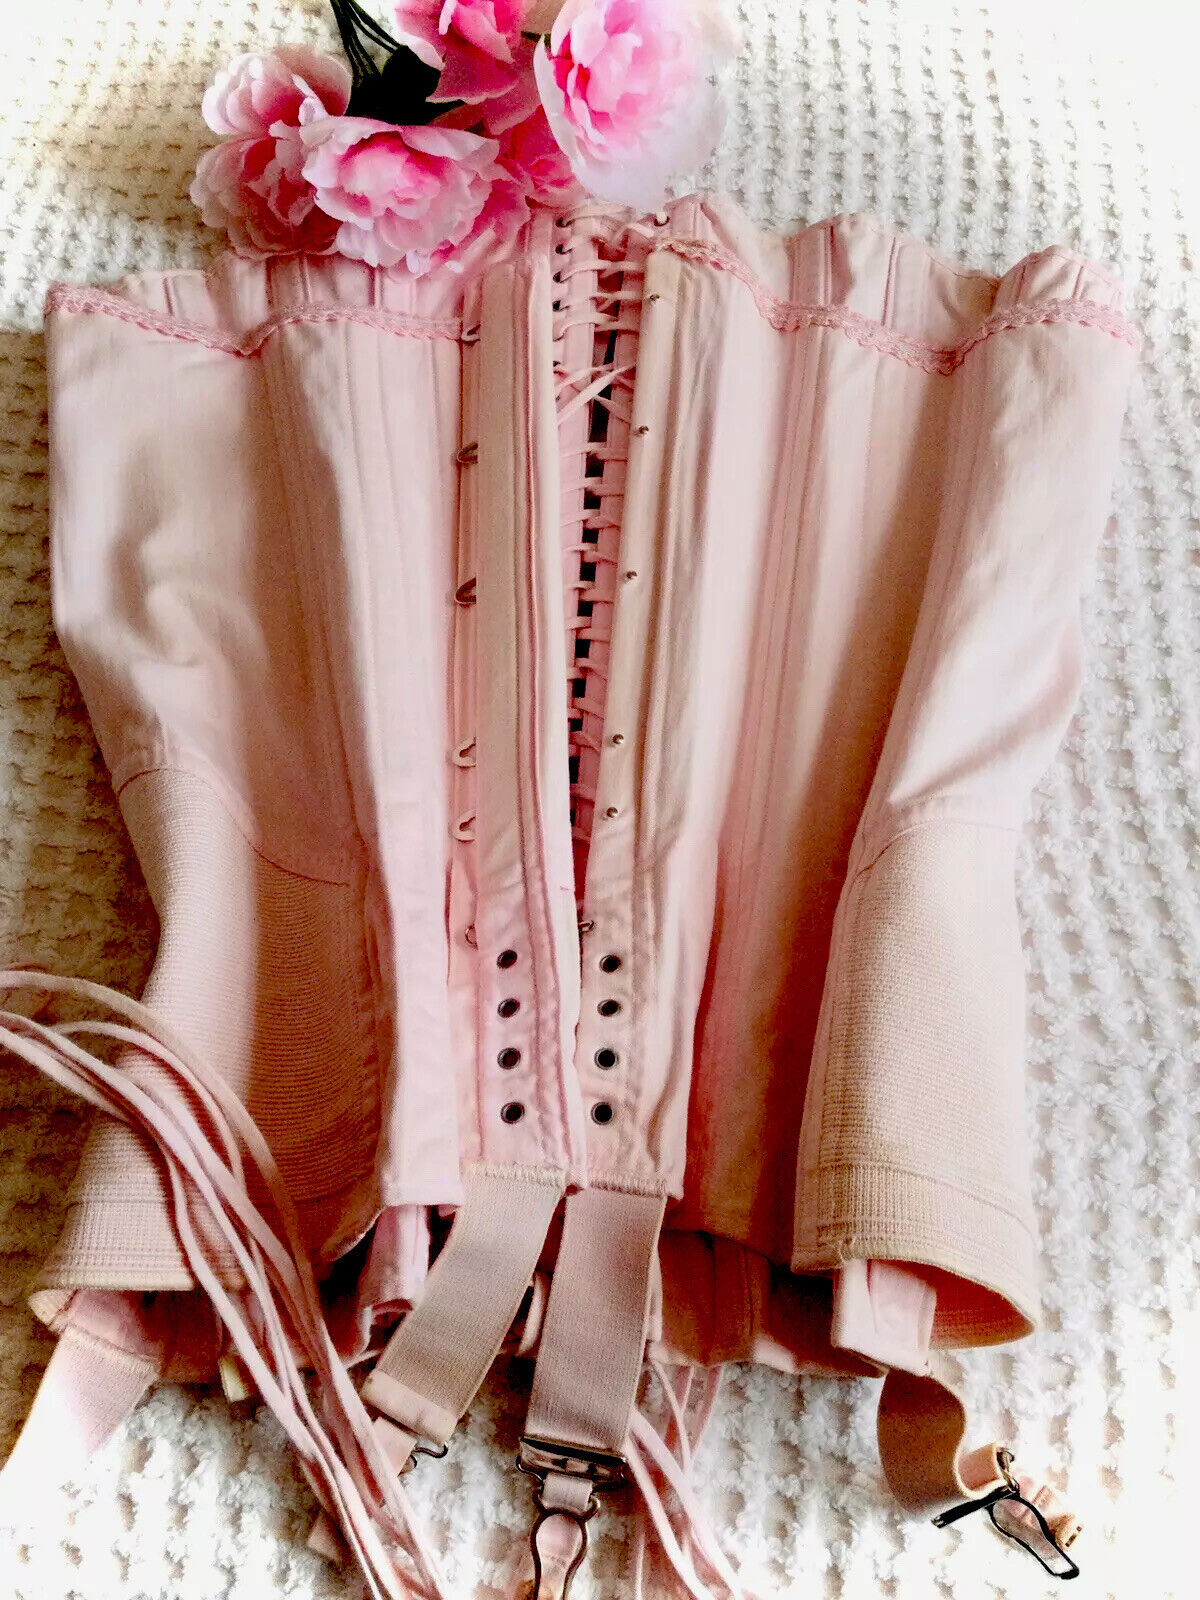 Antique Free shipping / New Vintage Corset SPIRELLA Fully Boned 1920 Draw 70% OFF Outlet Strings